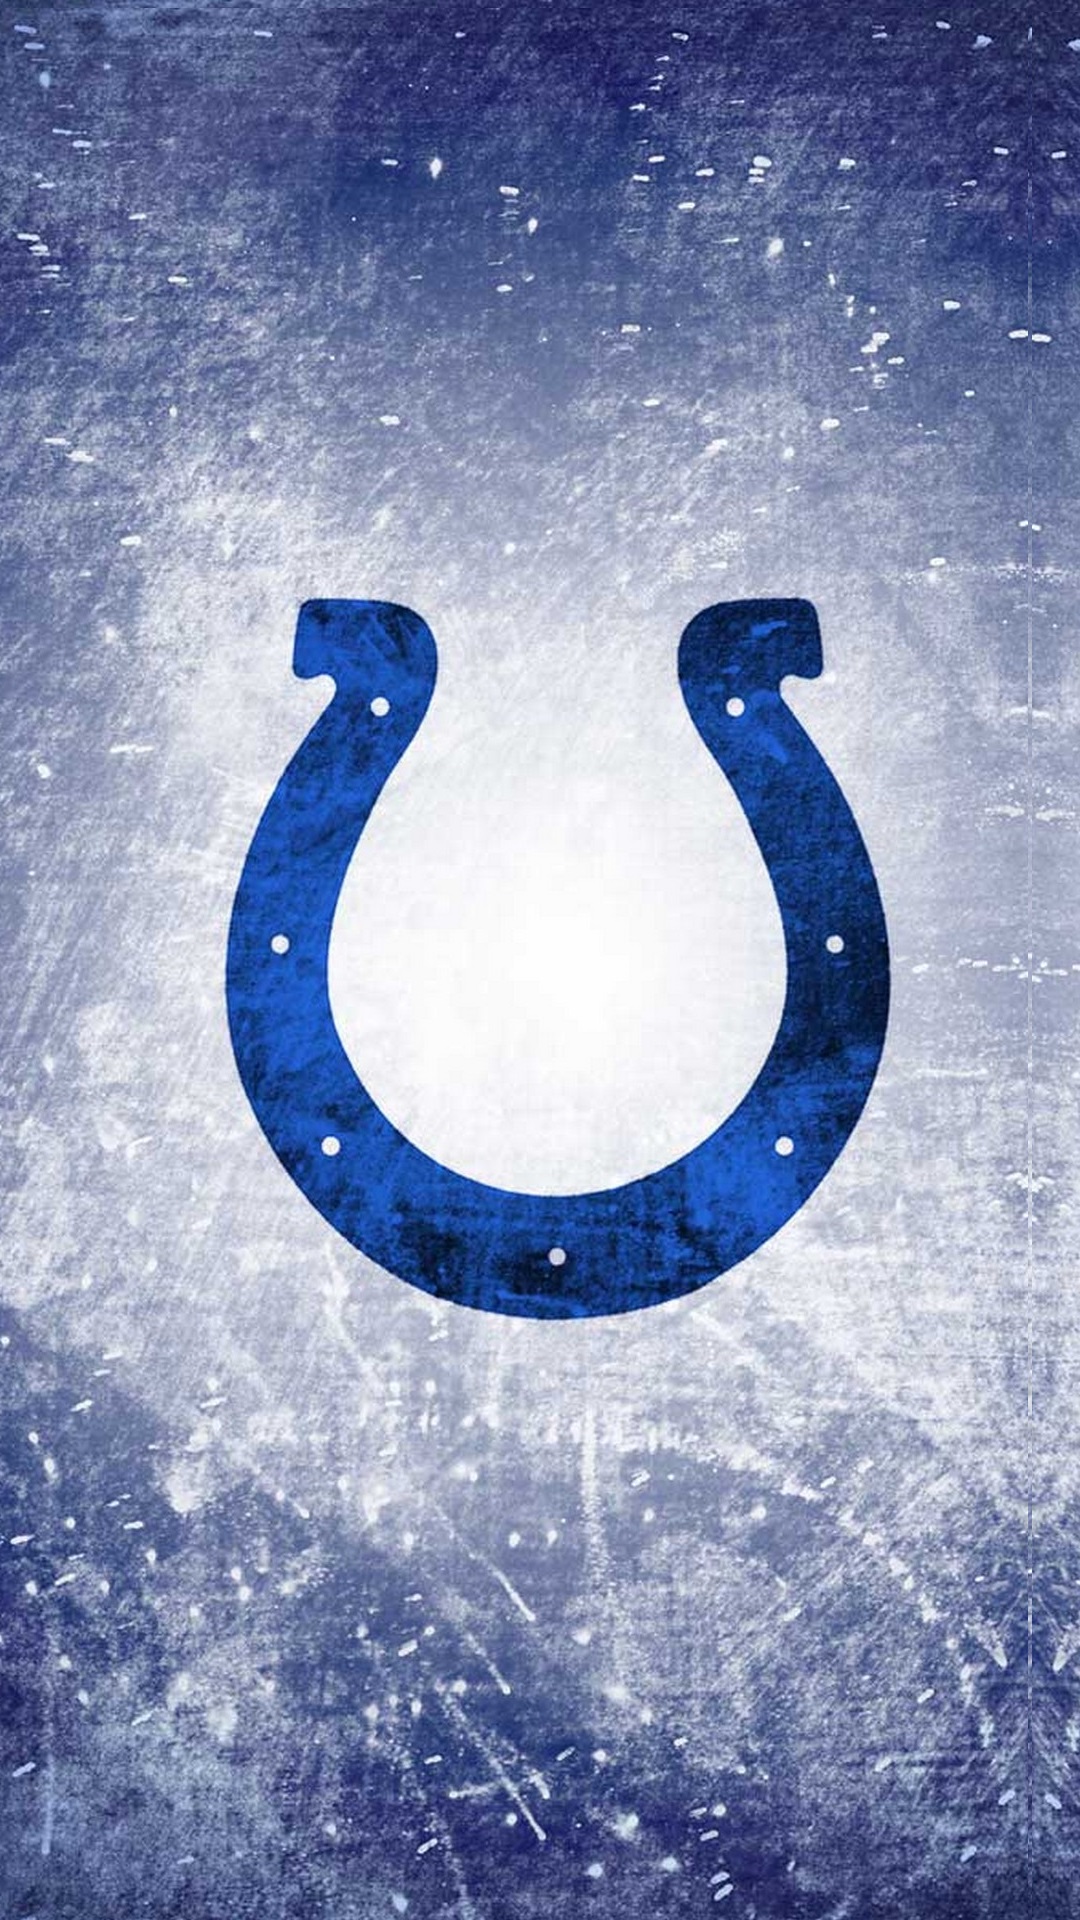 Indianapolis Colts iPhone XR Wallpaper With high-resolution 1080X1920 pixel. Download and set as wallpaper for Desktop Computer, Apple iPhone X, XS Max, XR, 8, 7, 6, SE, iPad, Android